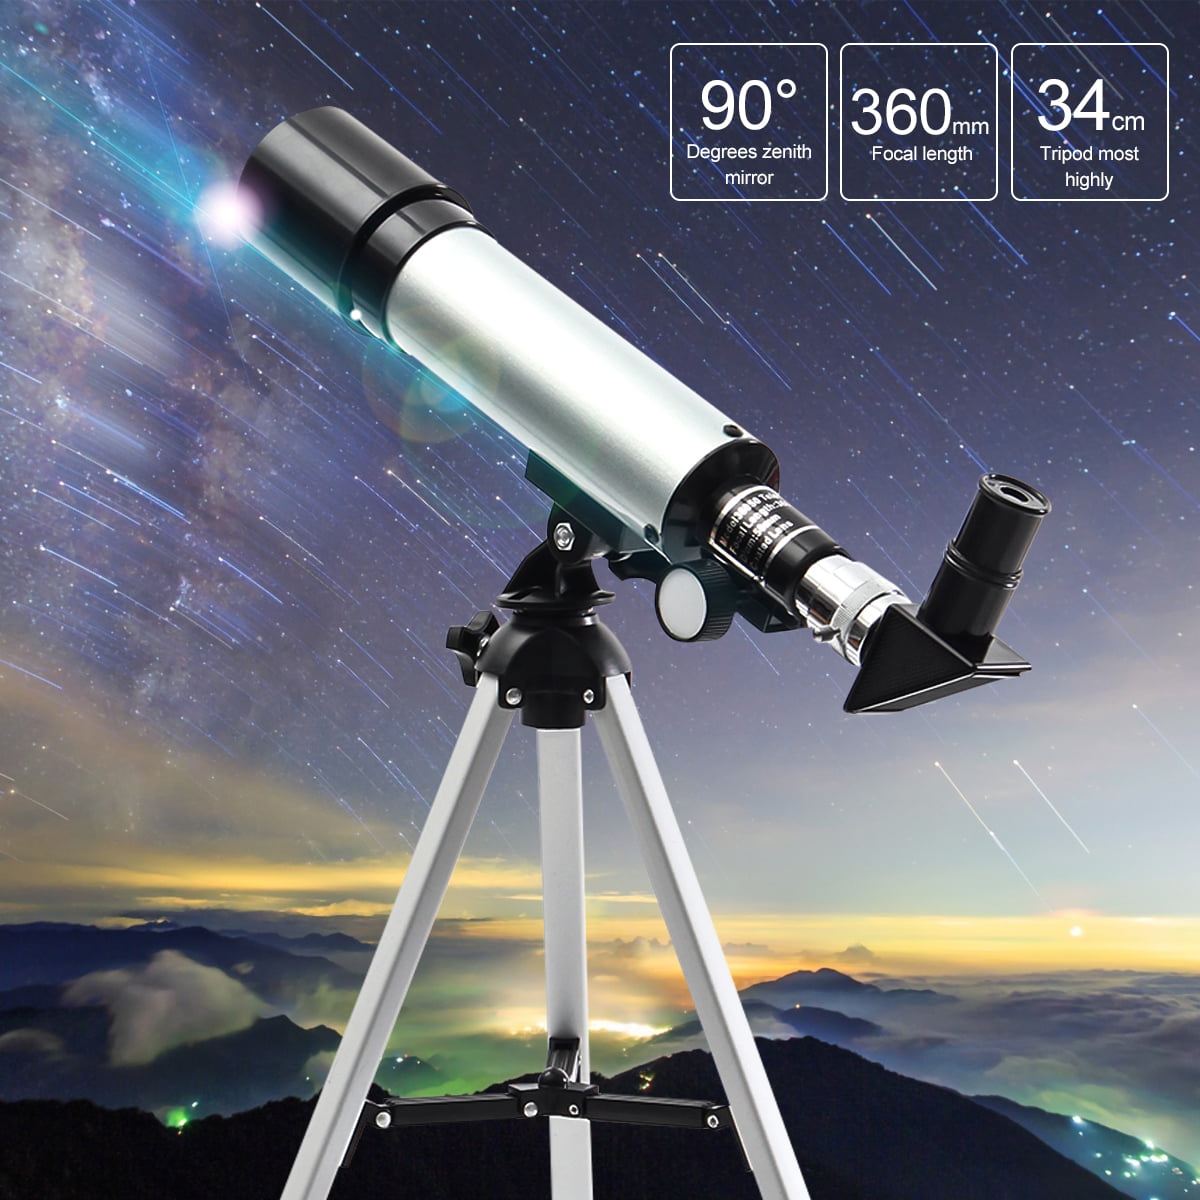 90X Telescope Refractor Astronomical Telescope with Tripod for Kid Beginners 